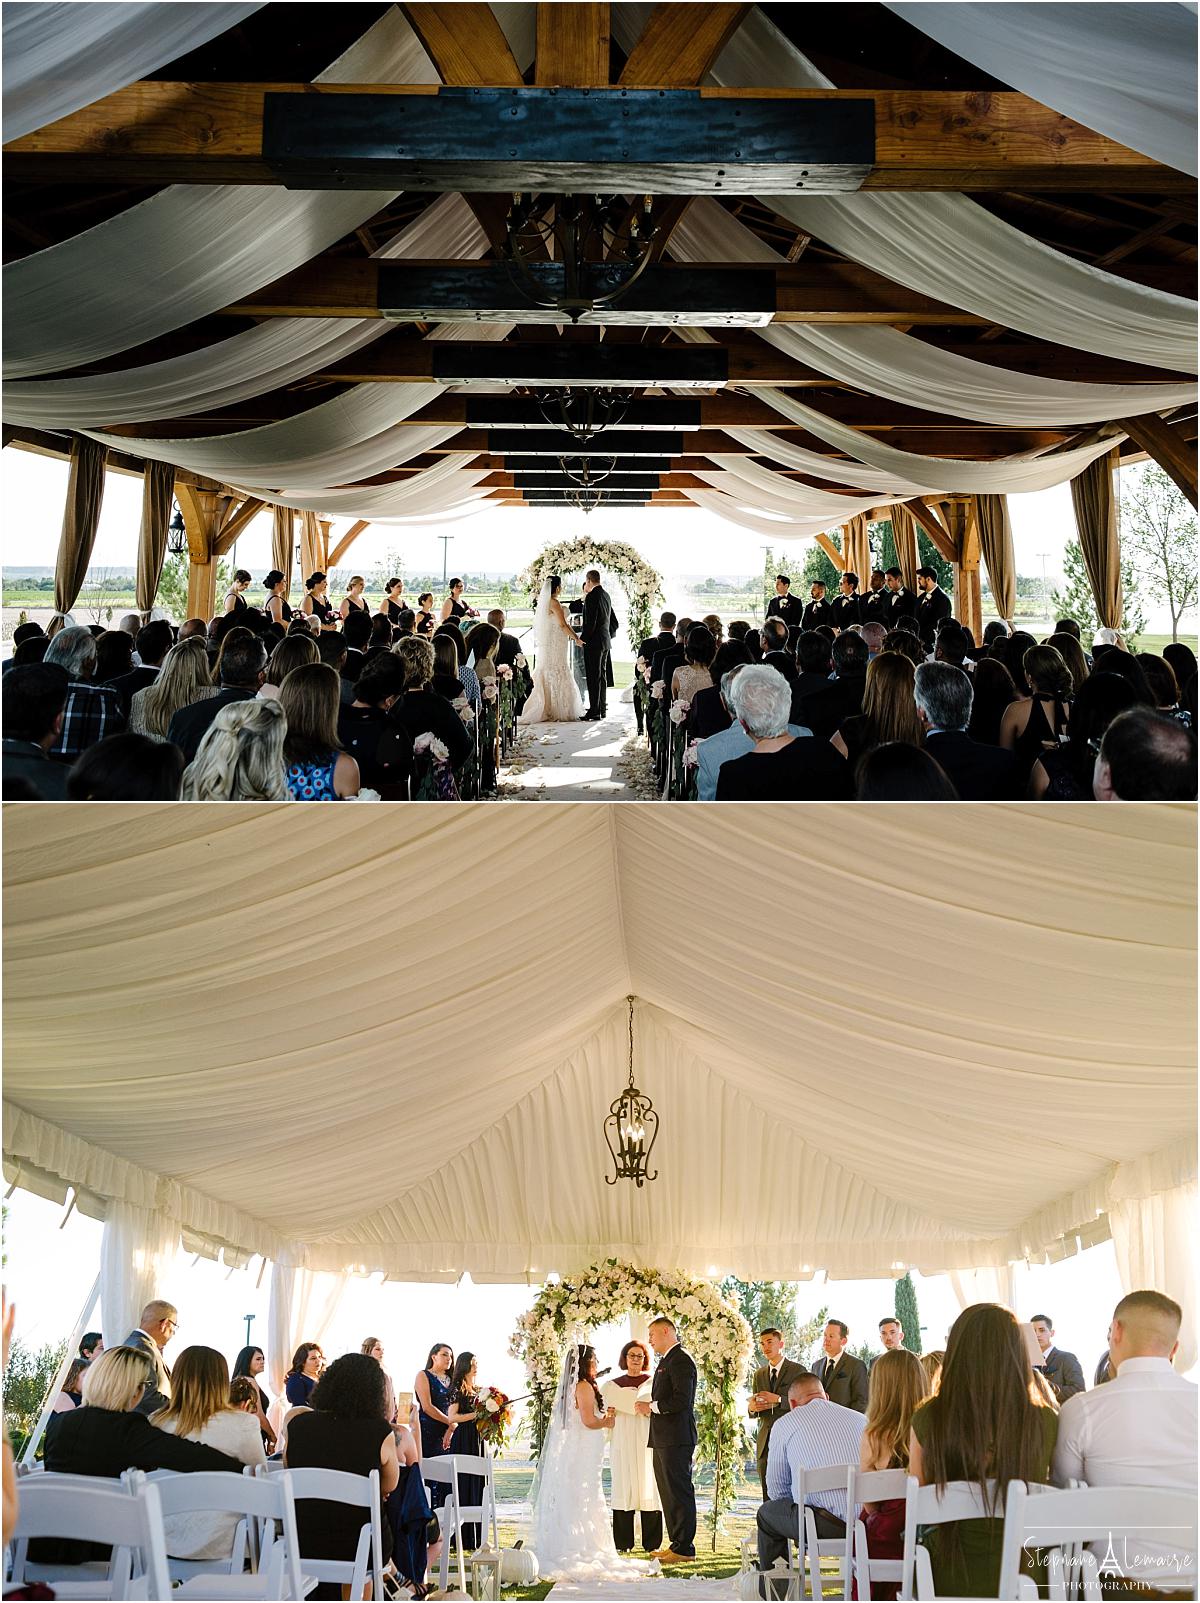 Wedding ceremony at Grace Gardens wedding venue in el paso texas by stephane lemaire photography